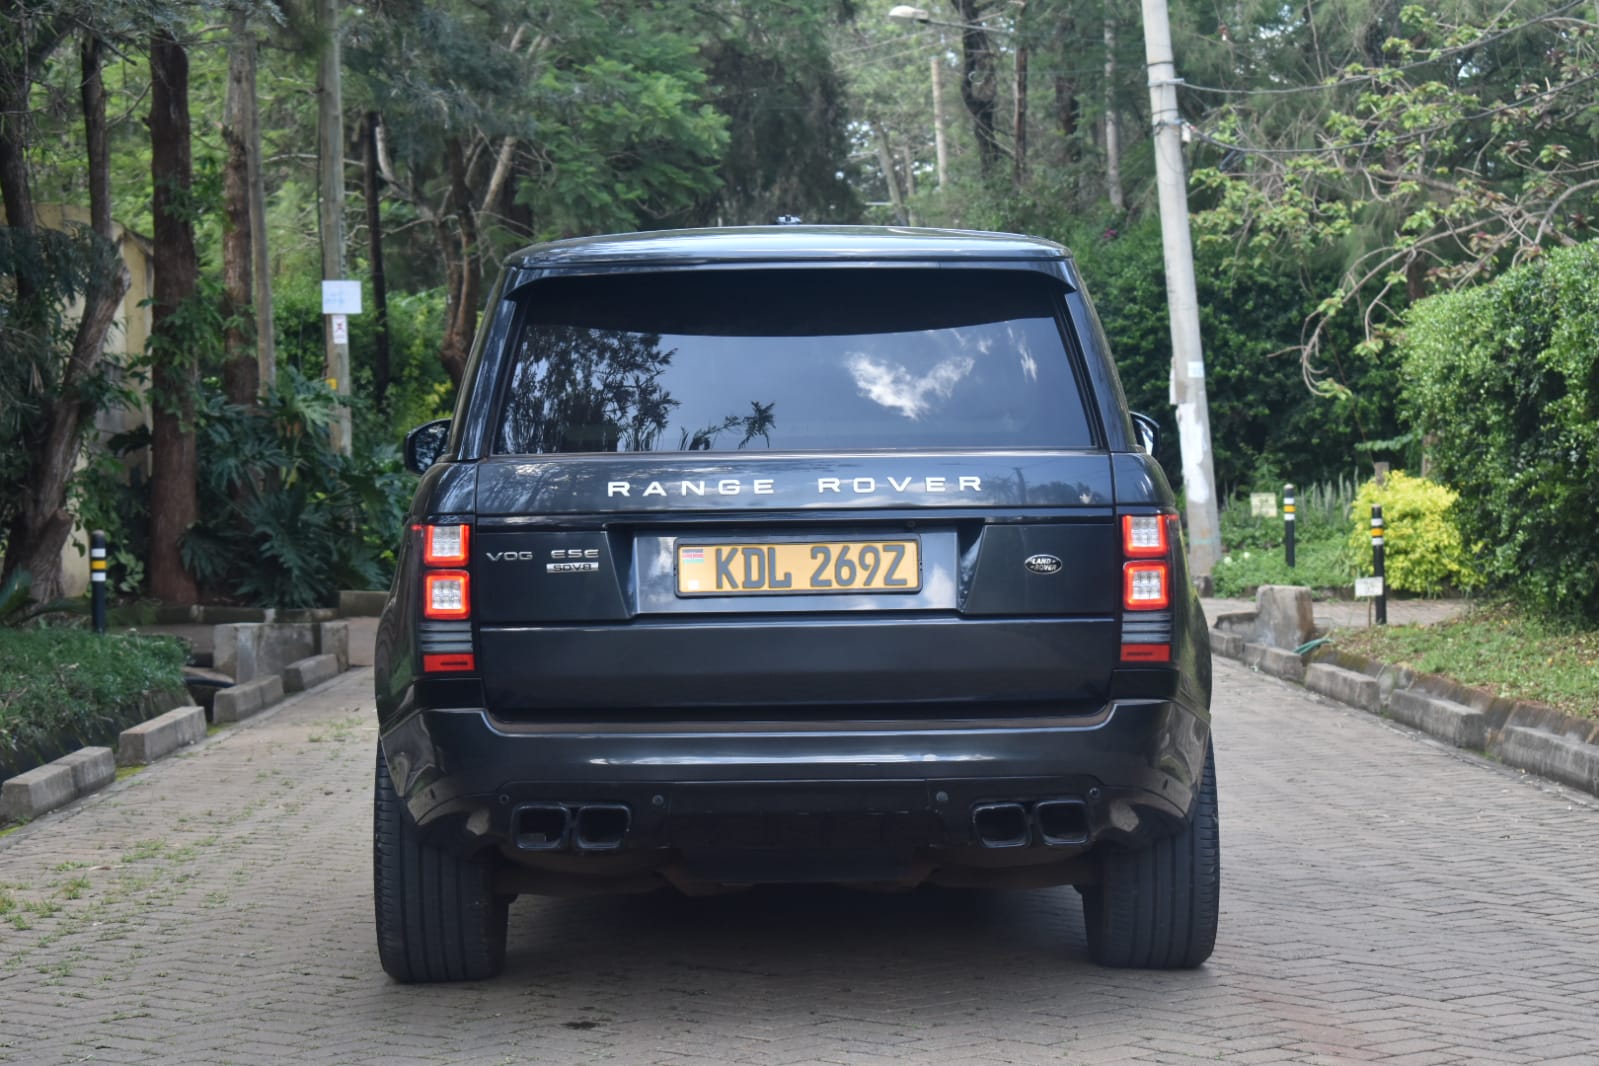 RANGE ROVER VOGUE SDV8 4.4 SUNROOF You Pay 40% DEPOSIT TRADE IN OK For sale in kenya exclusive